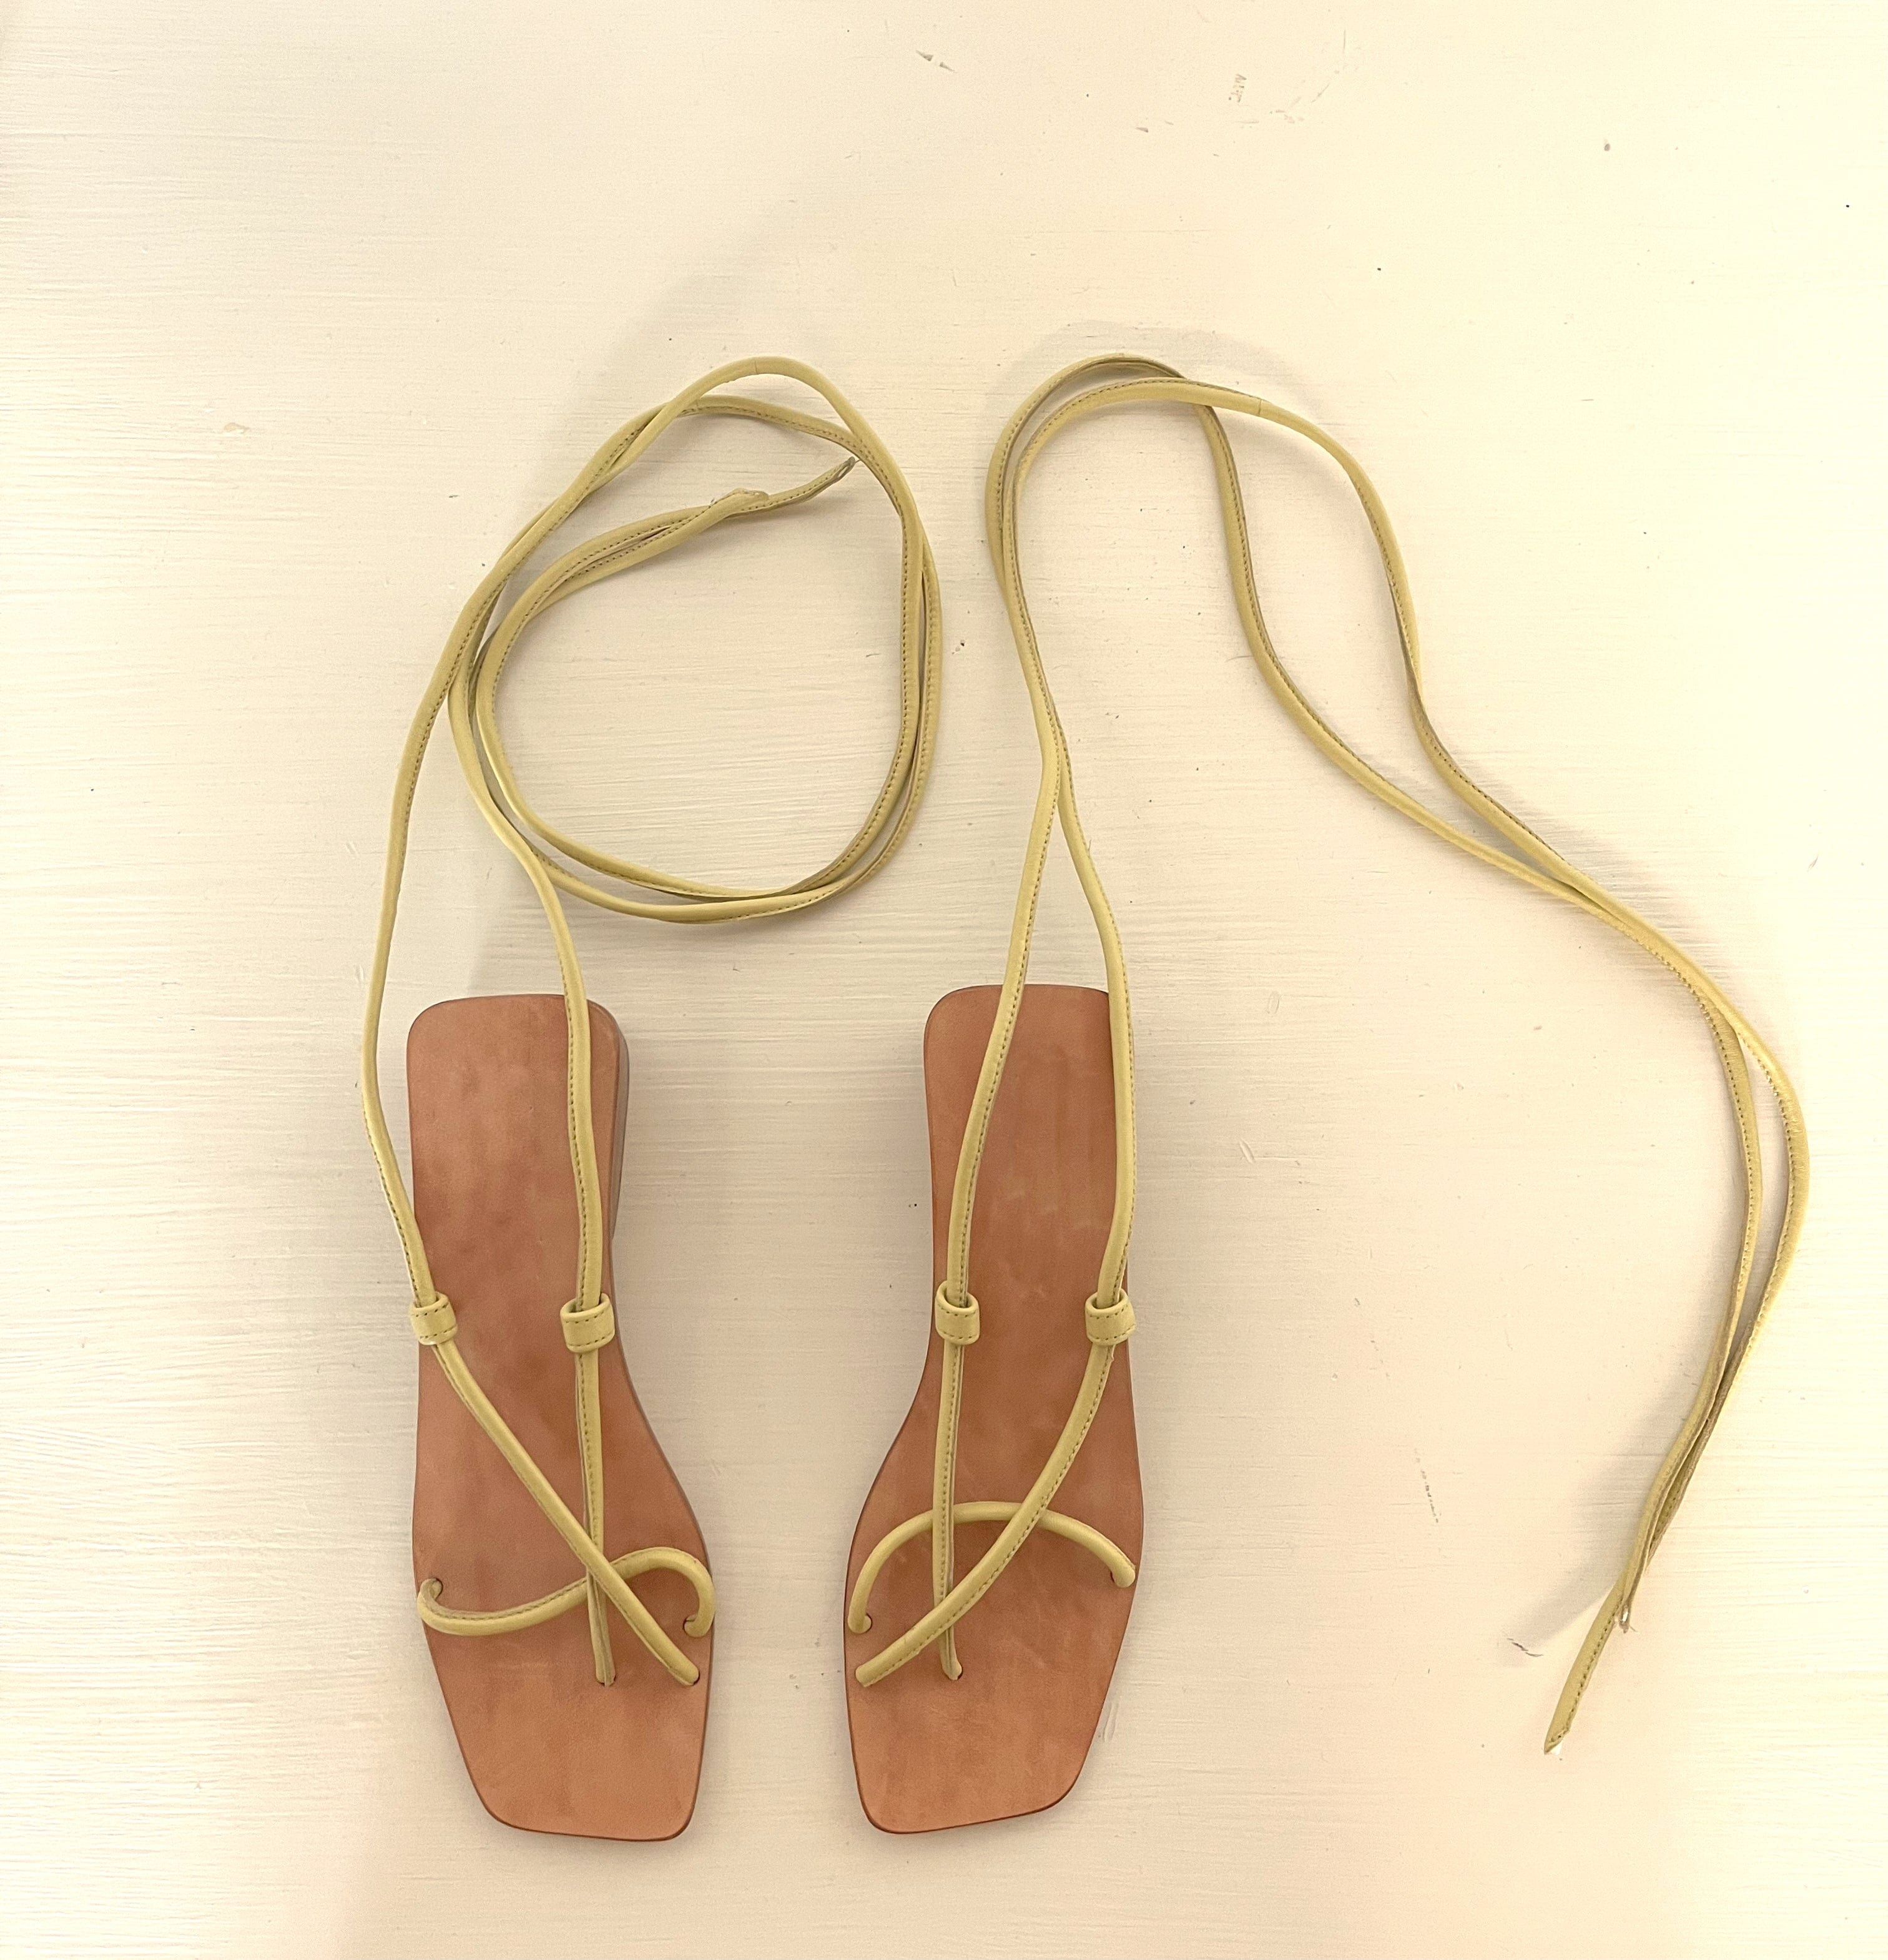 Daisy Sandals (Chartreuse)